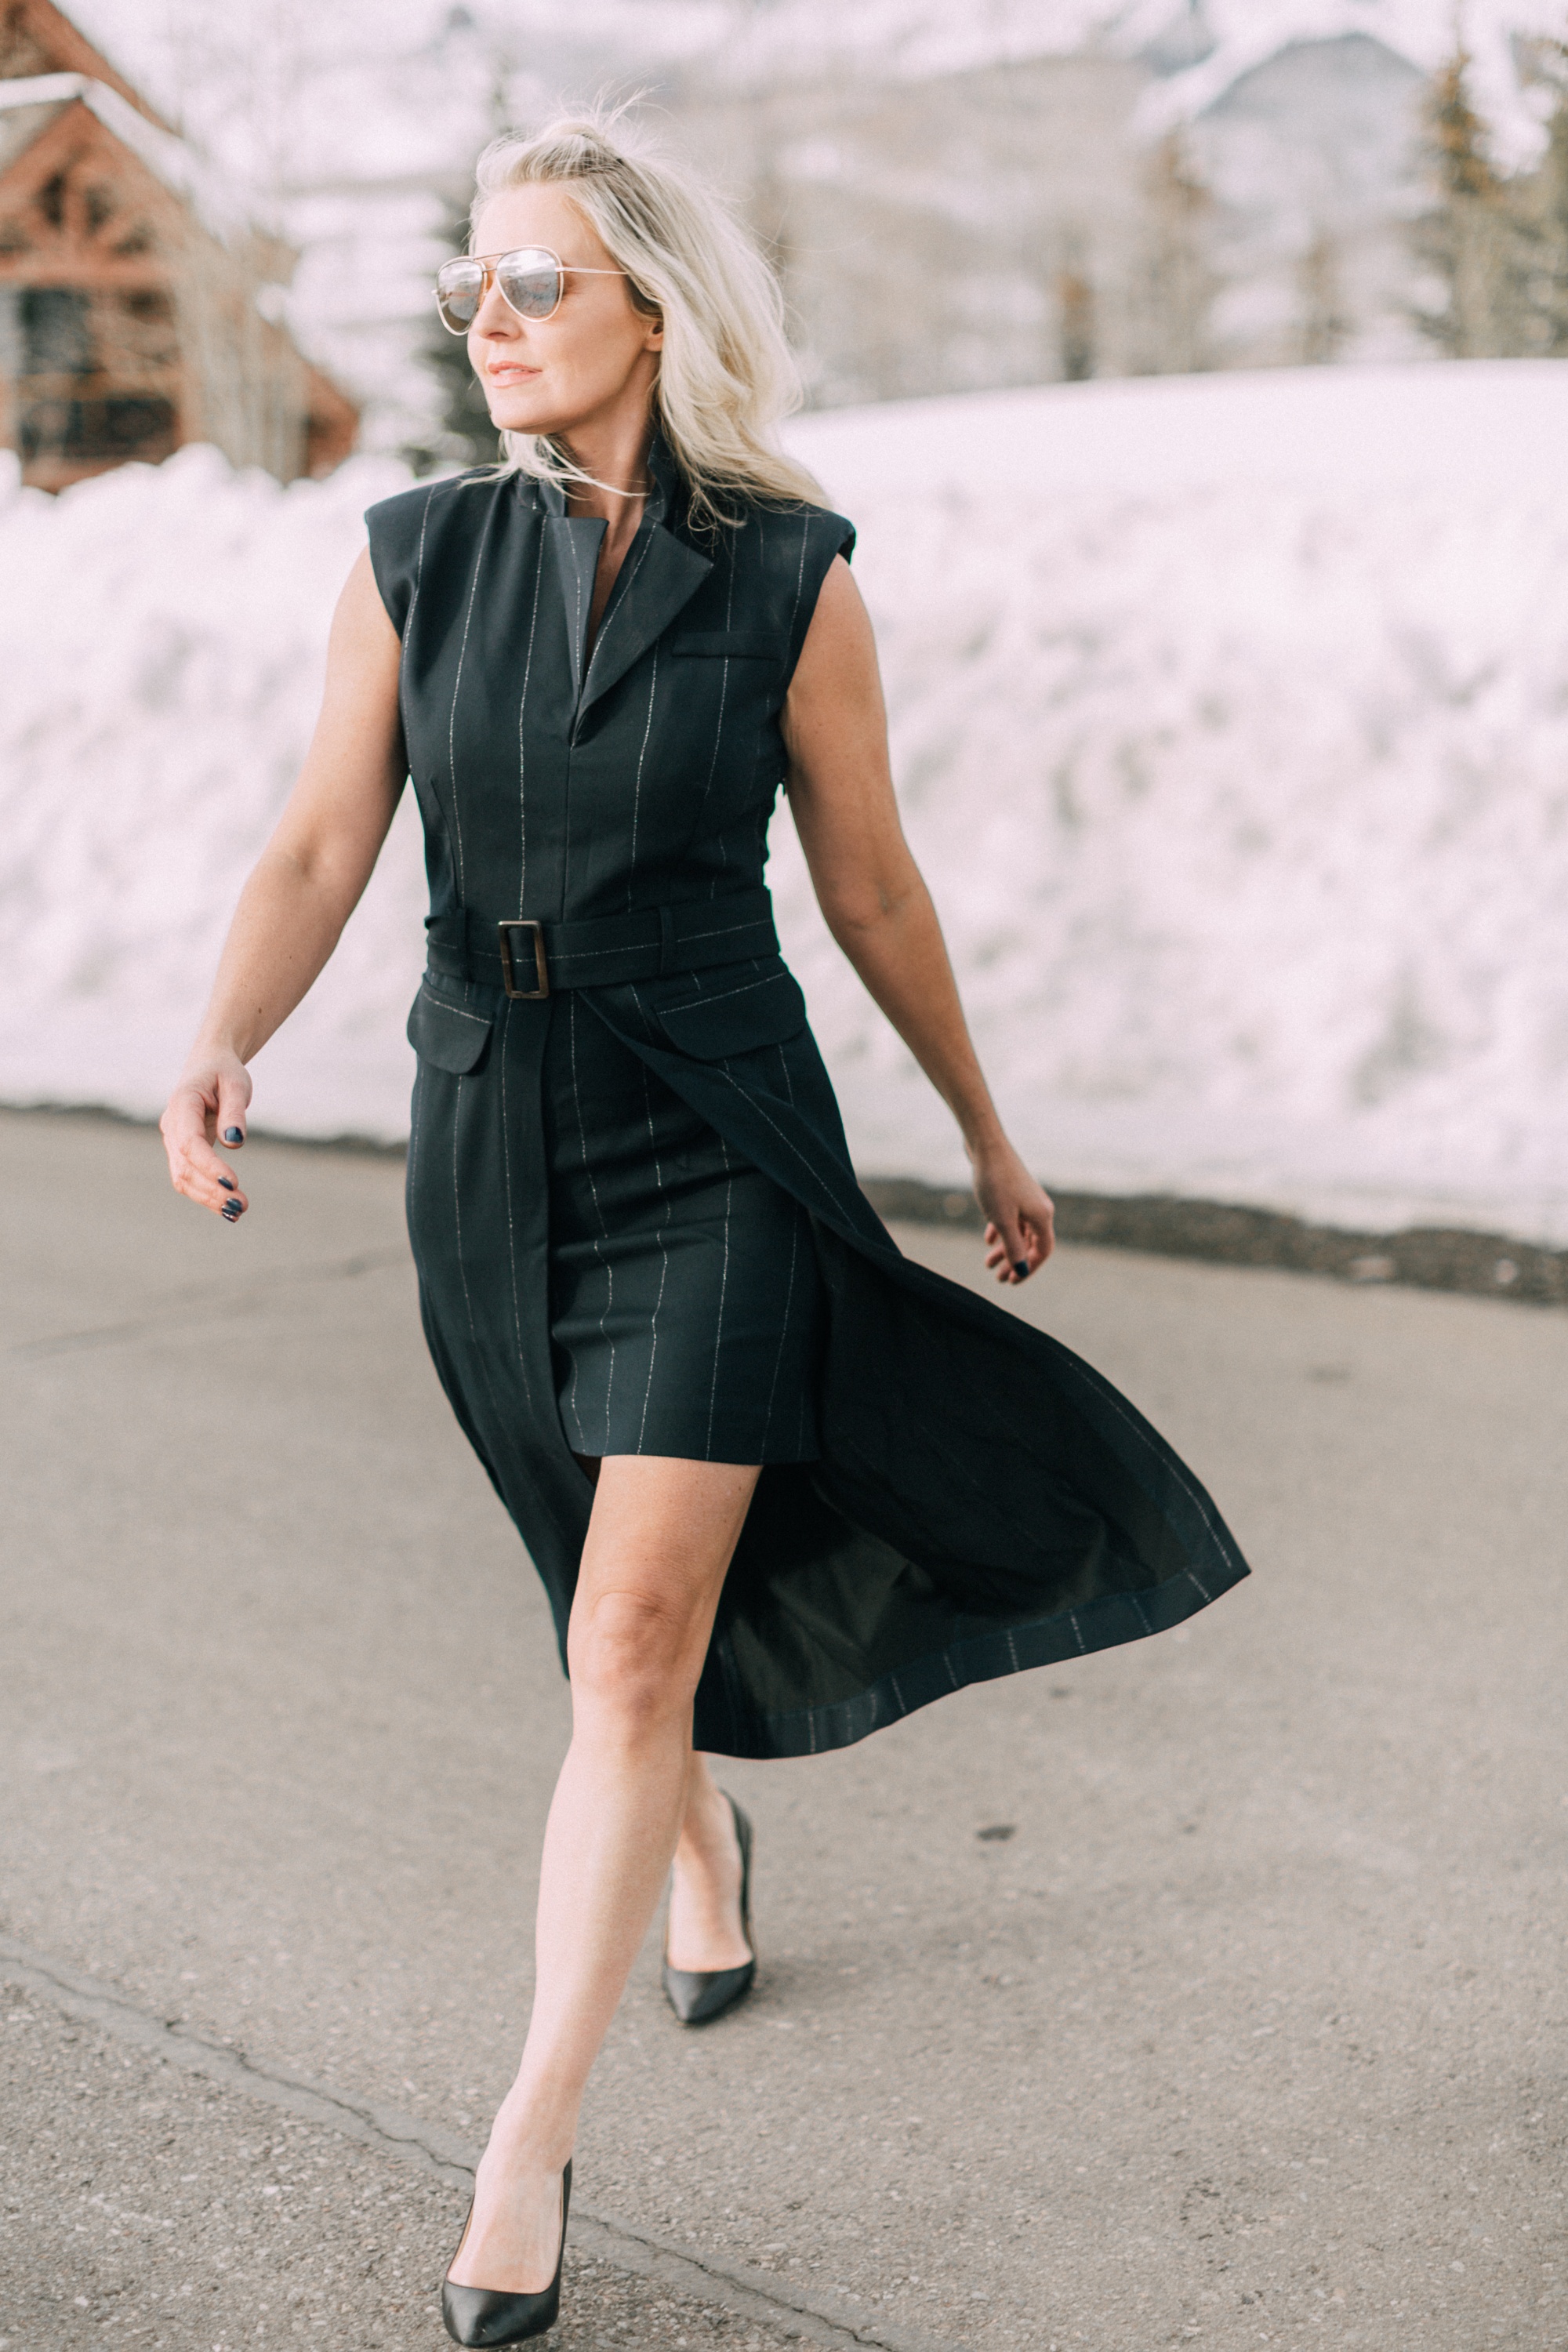 Spring Office Dress, Fashion Blogger Erin Busbee Of Busbeestyle.com Wearing A Navy Pinstripe Dress From Asos With Black Jimmy Choo Pumps In Telluride, Colorado, Talking About Dresses For The Office